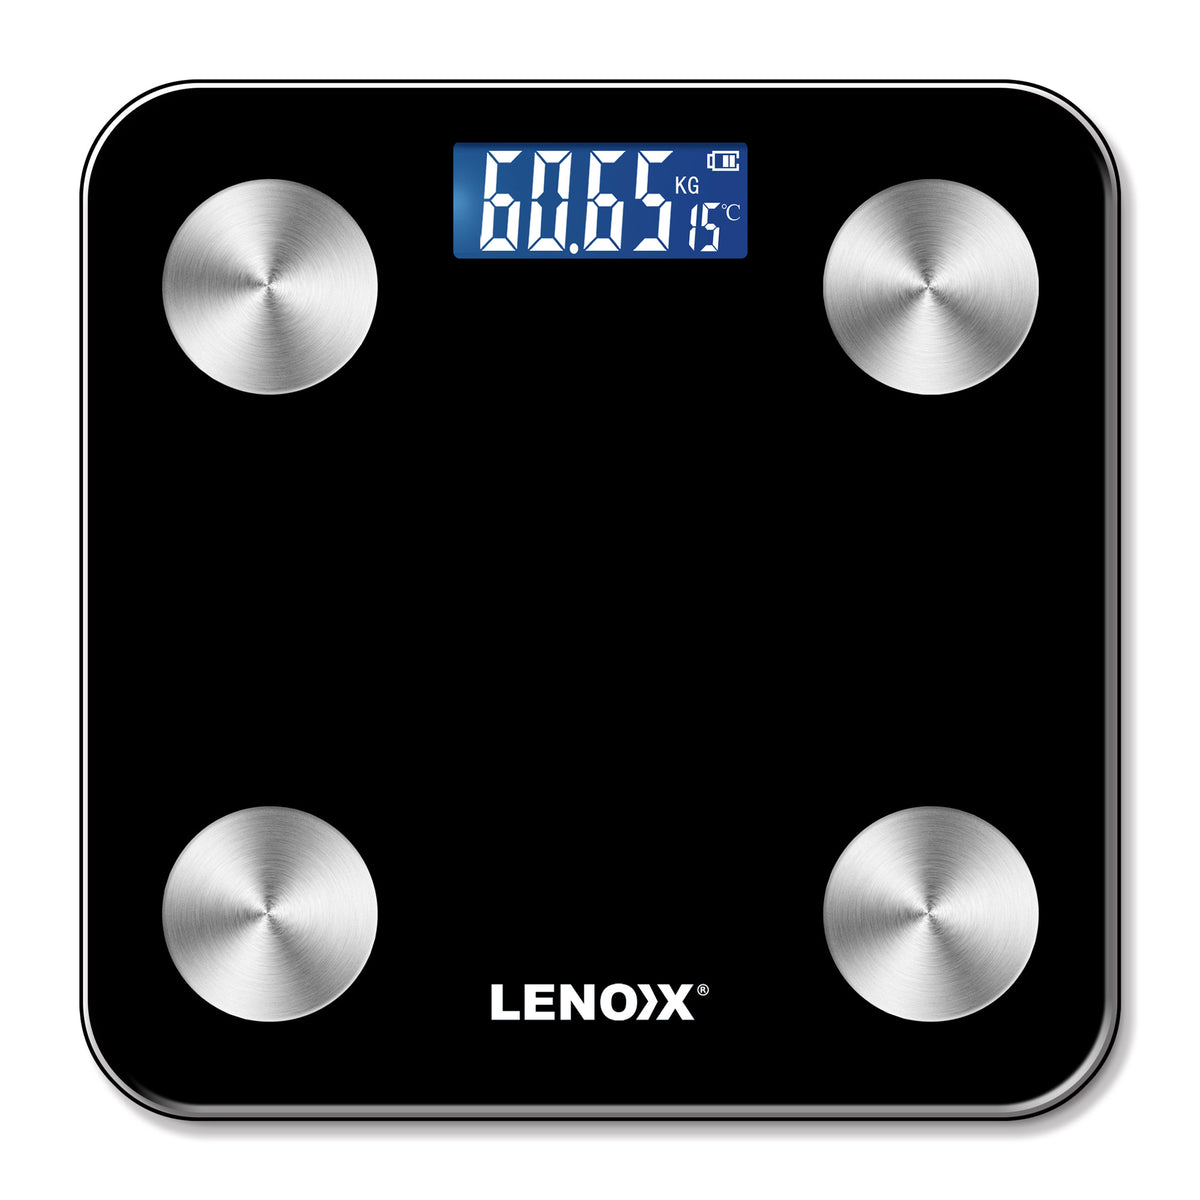 Lenoxx Smart Body Scale with Bluetooth, LED, Weight Tracking & Recording.